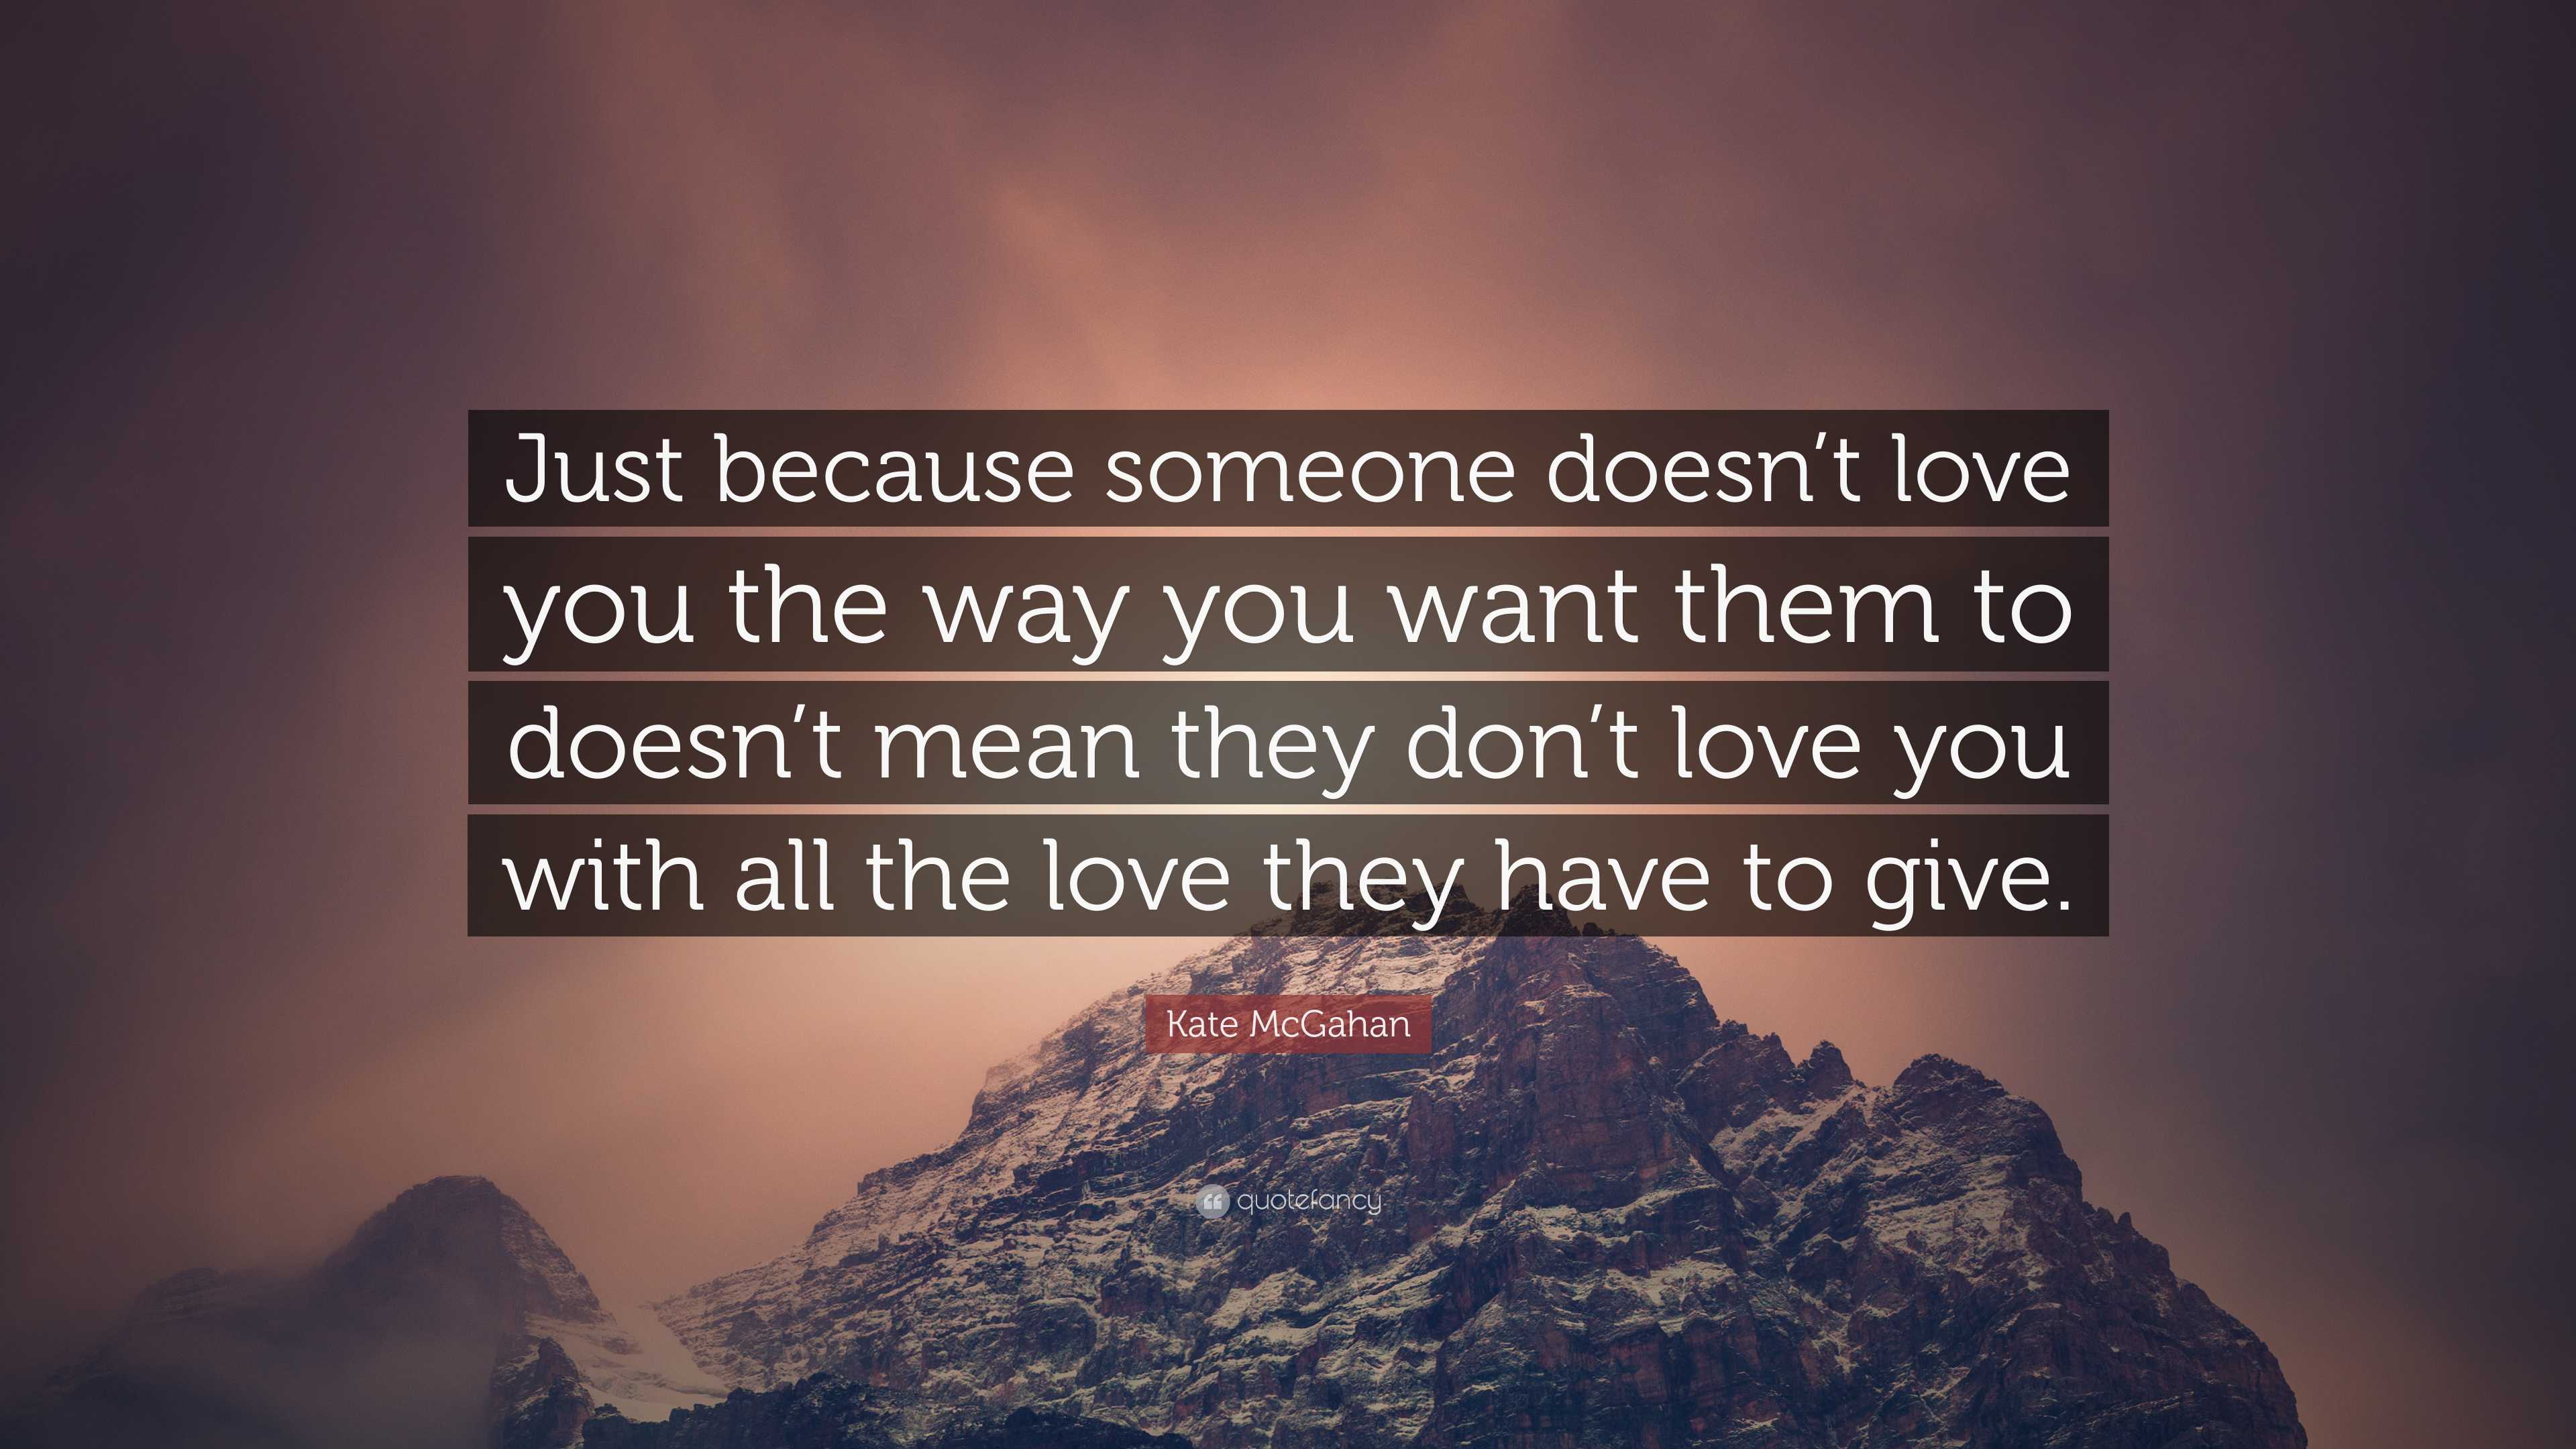 Kate McGahan Quote: “Just because someone doesn’t love you the way you ...